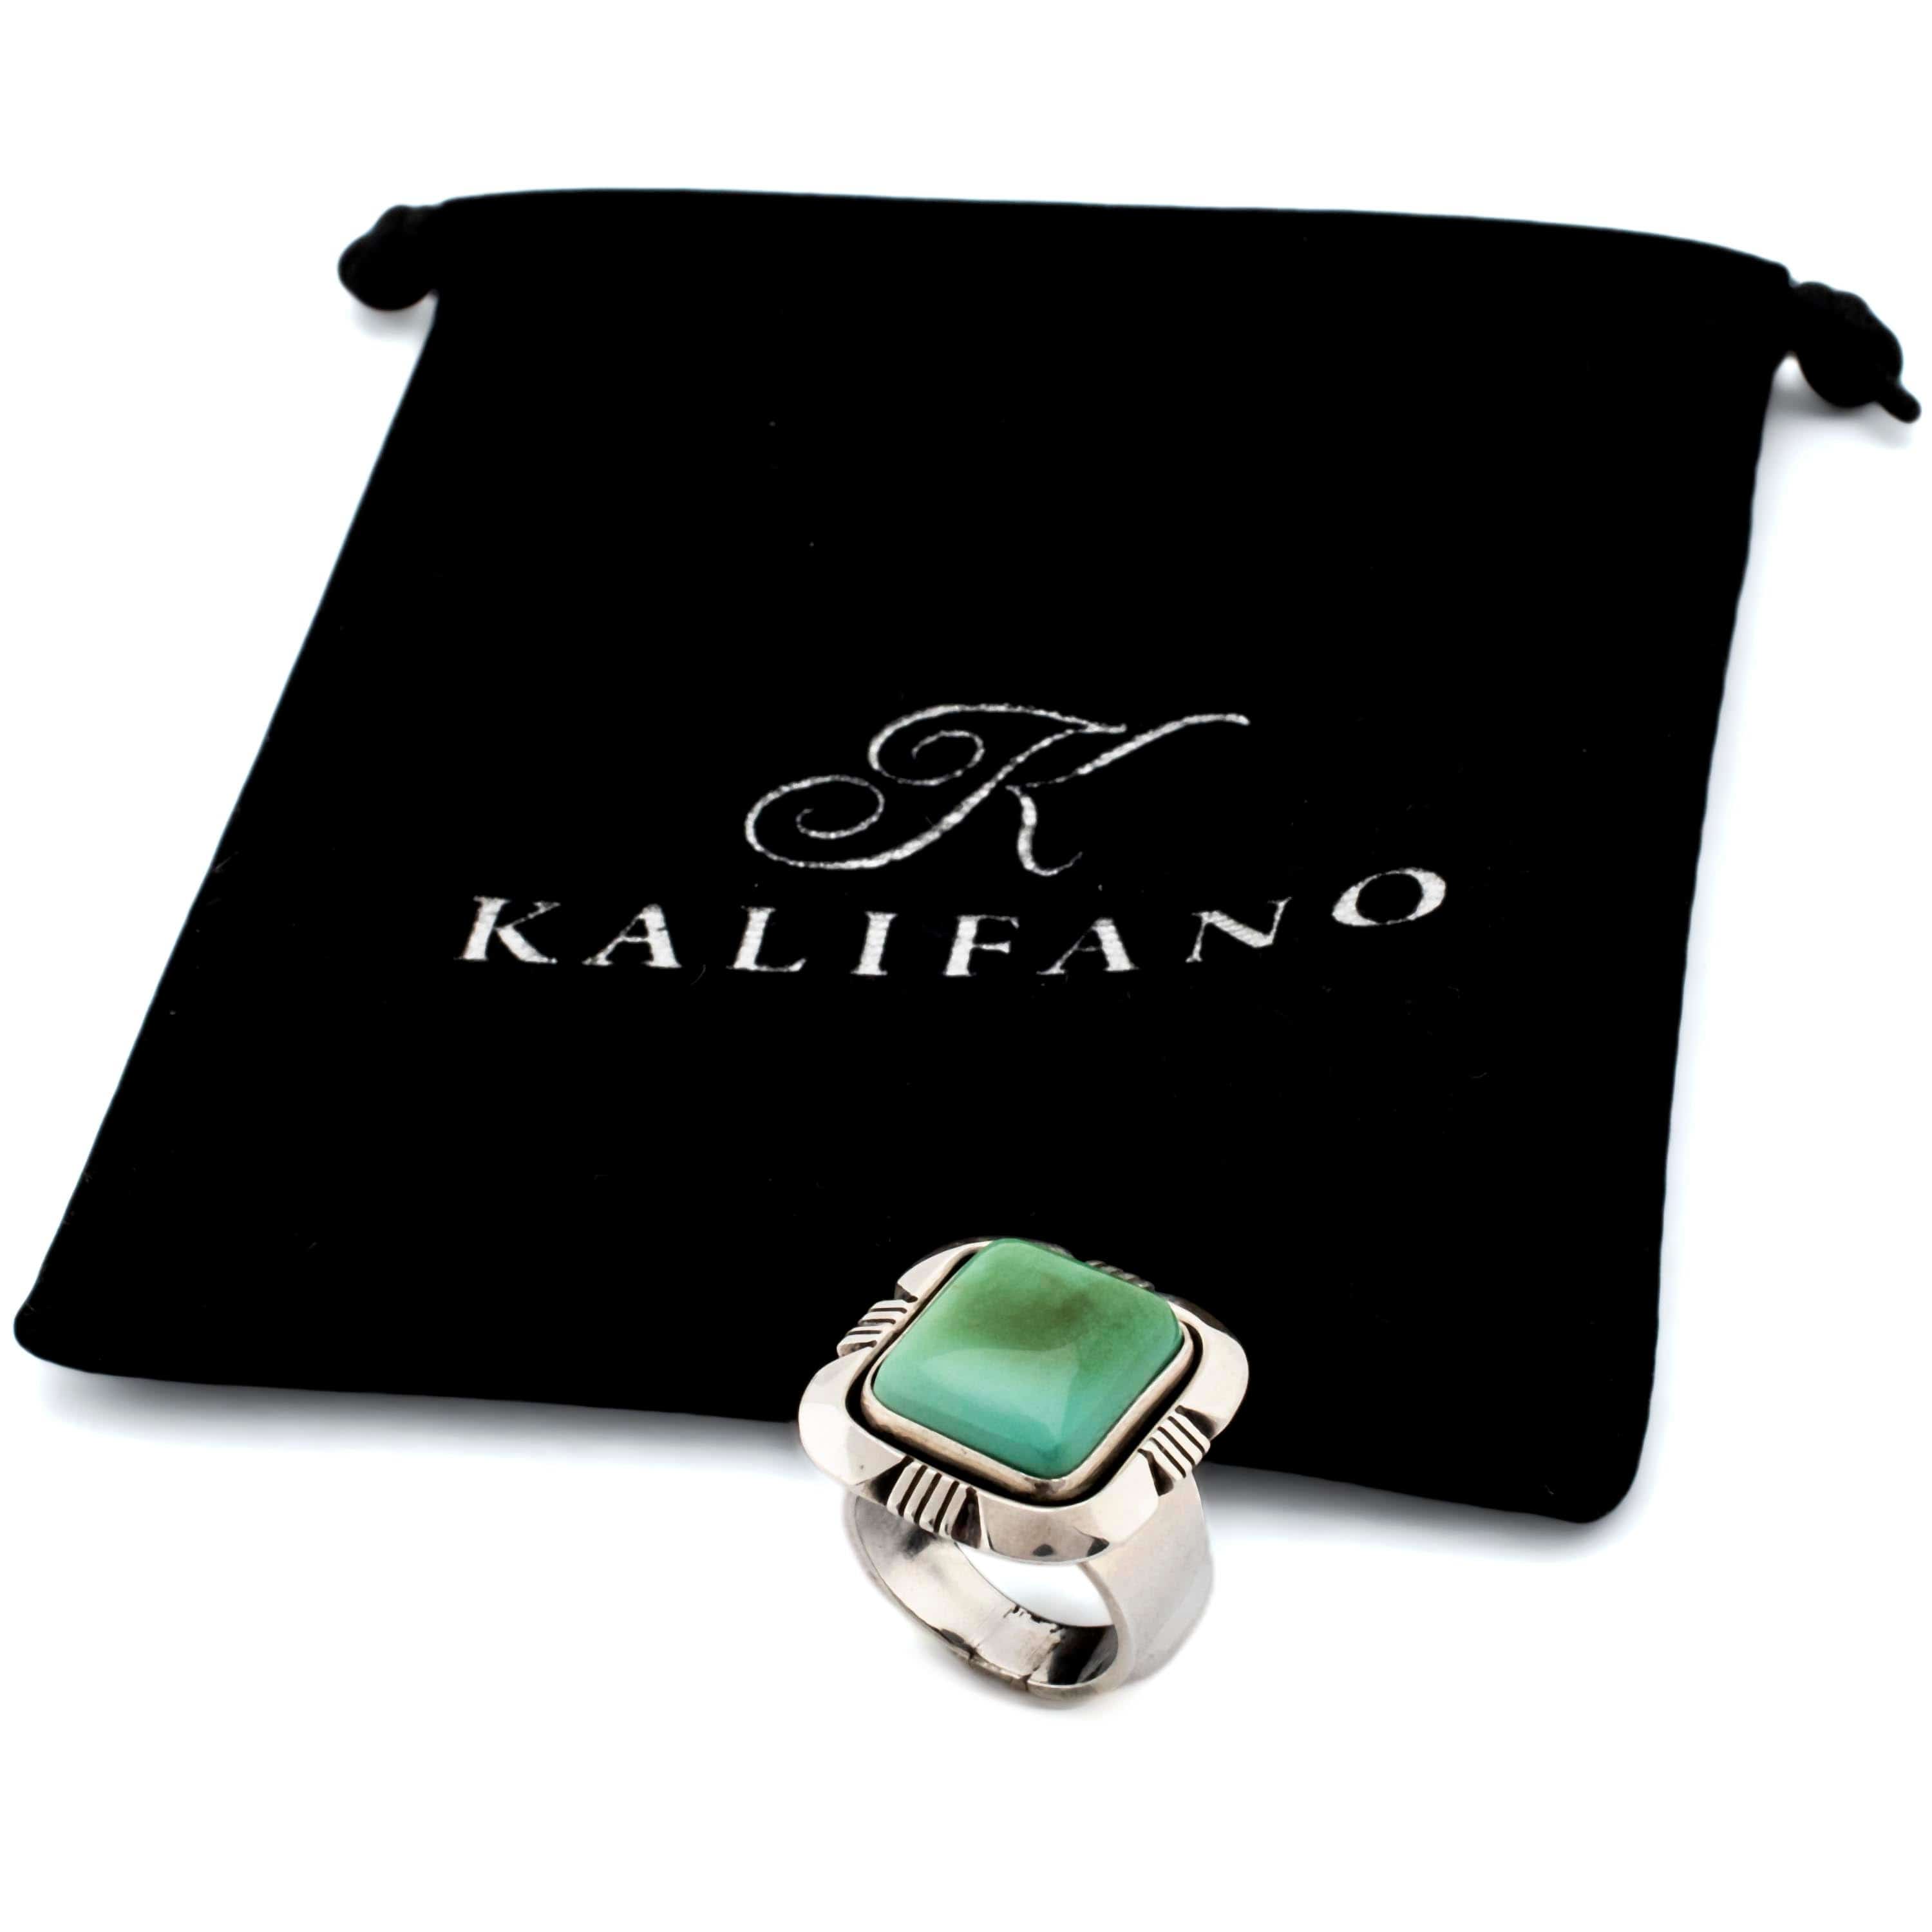 Kalifano Native American Jewelry 6 Eddie Secatero Royston Turquoise Square USA Native American Made 925 Sterling Silver Ring NAR800.023.6